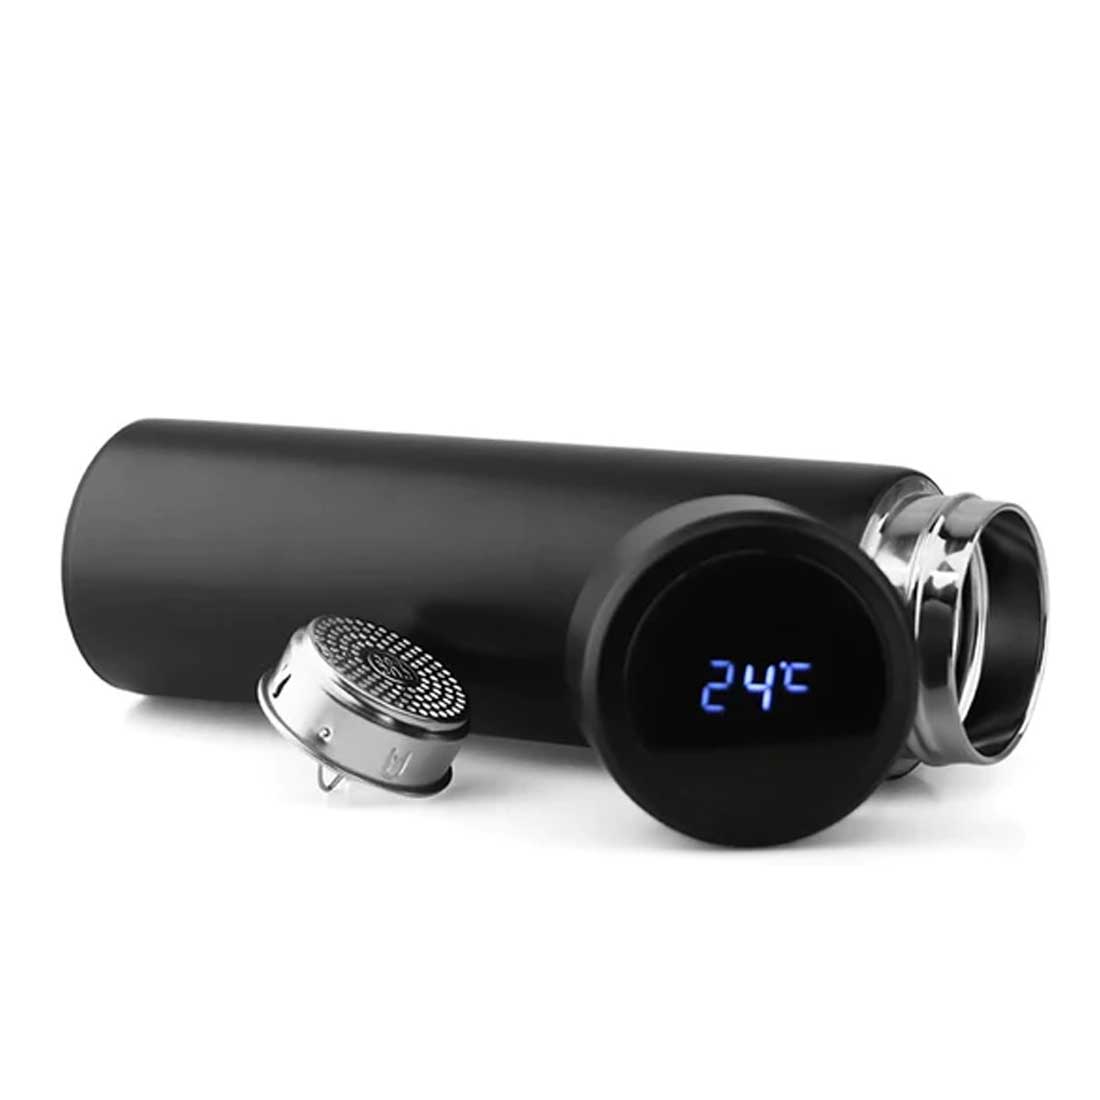 Custom Coffee Flask Thermal for Tea with Temperature Display - Add Name